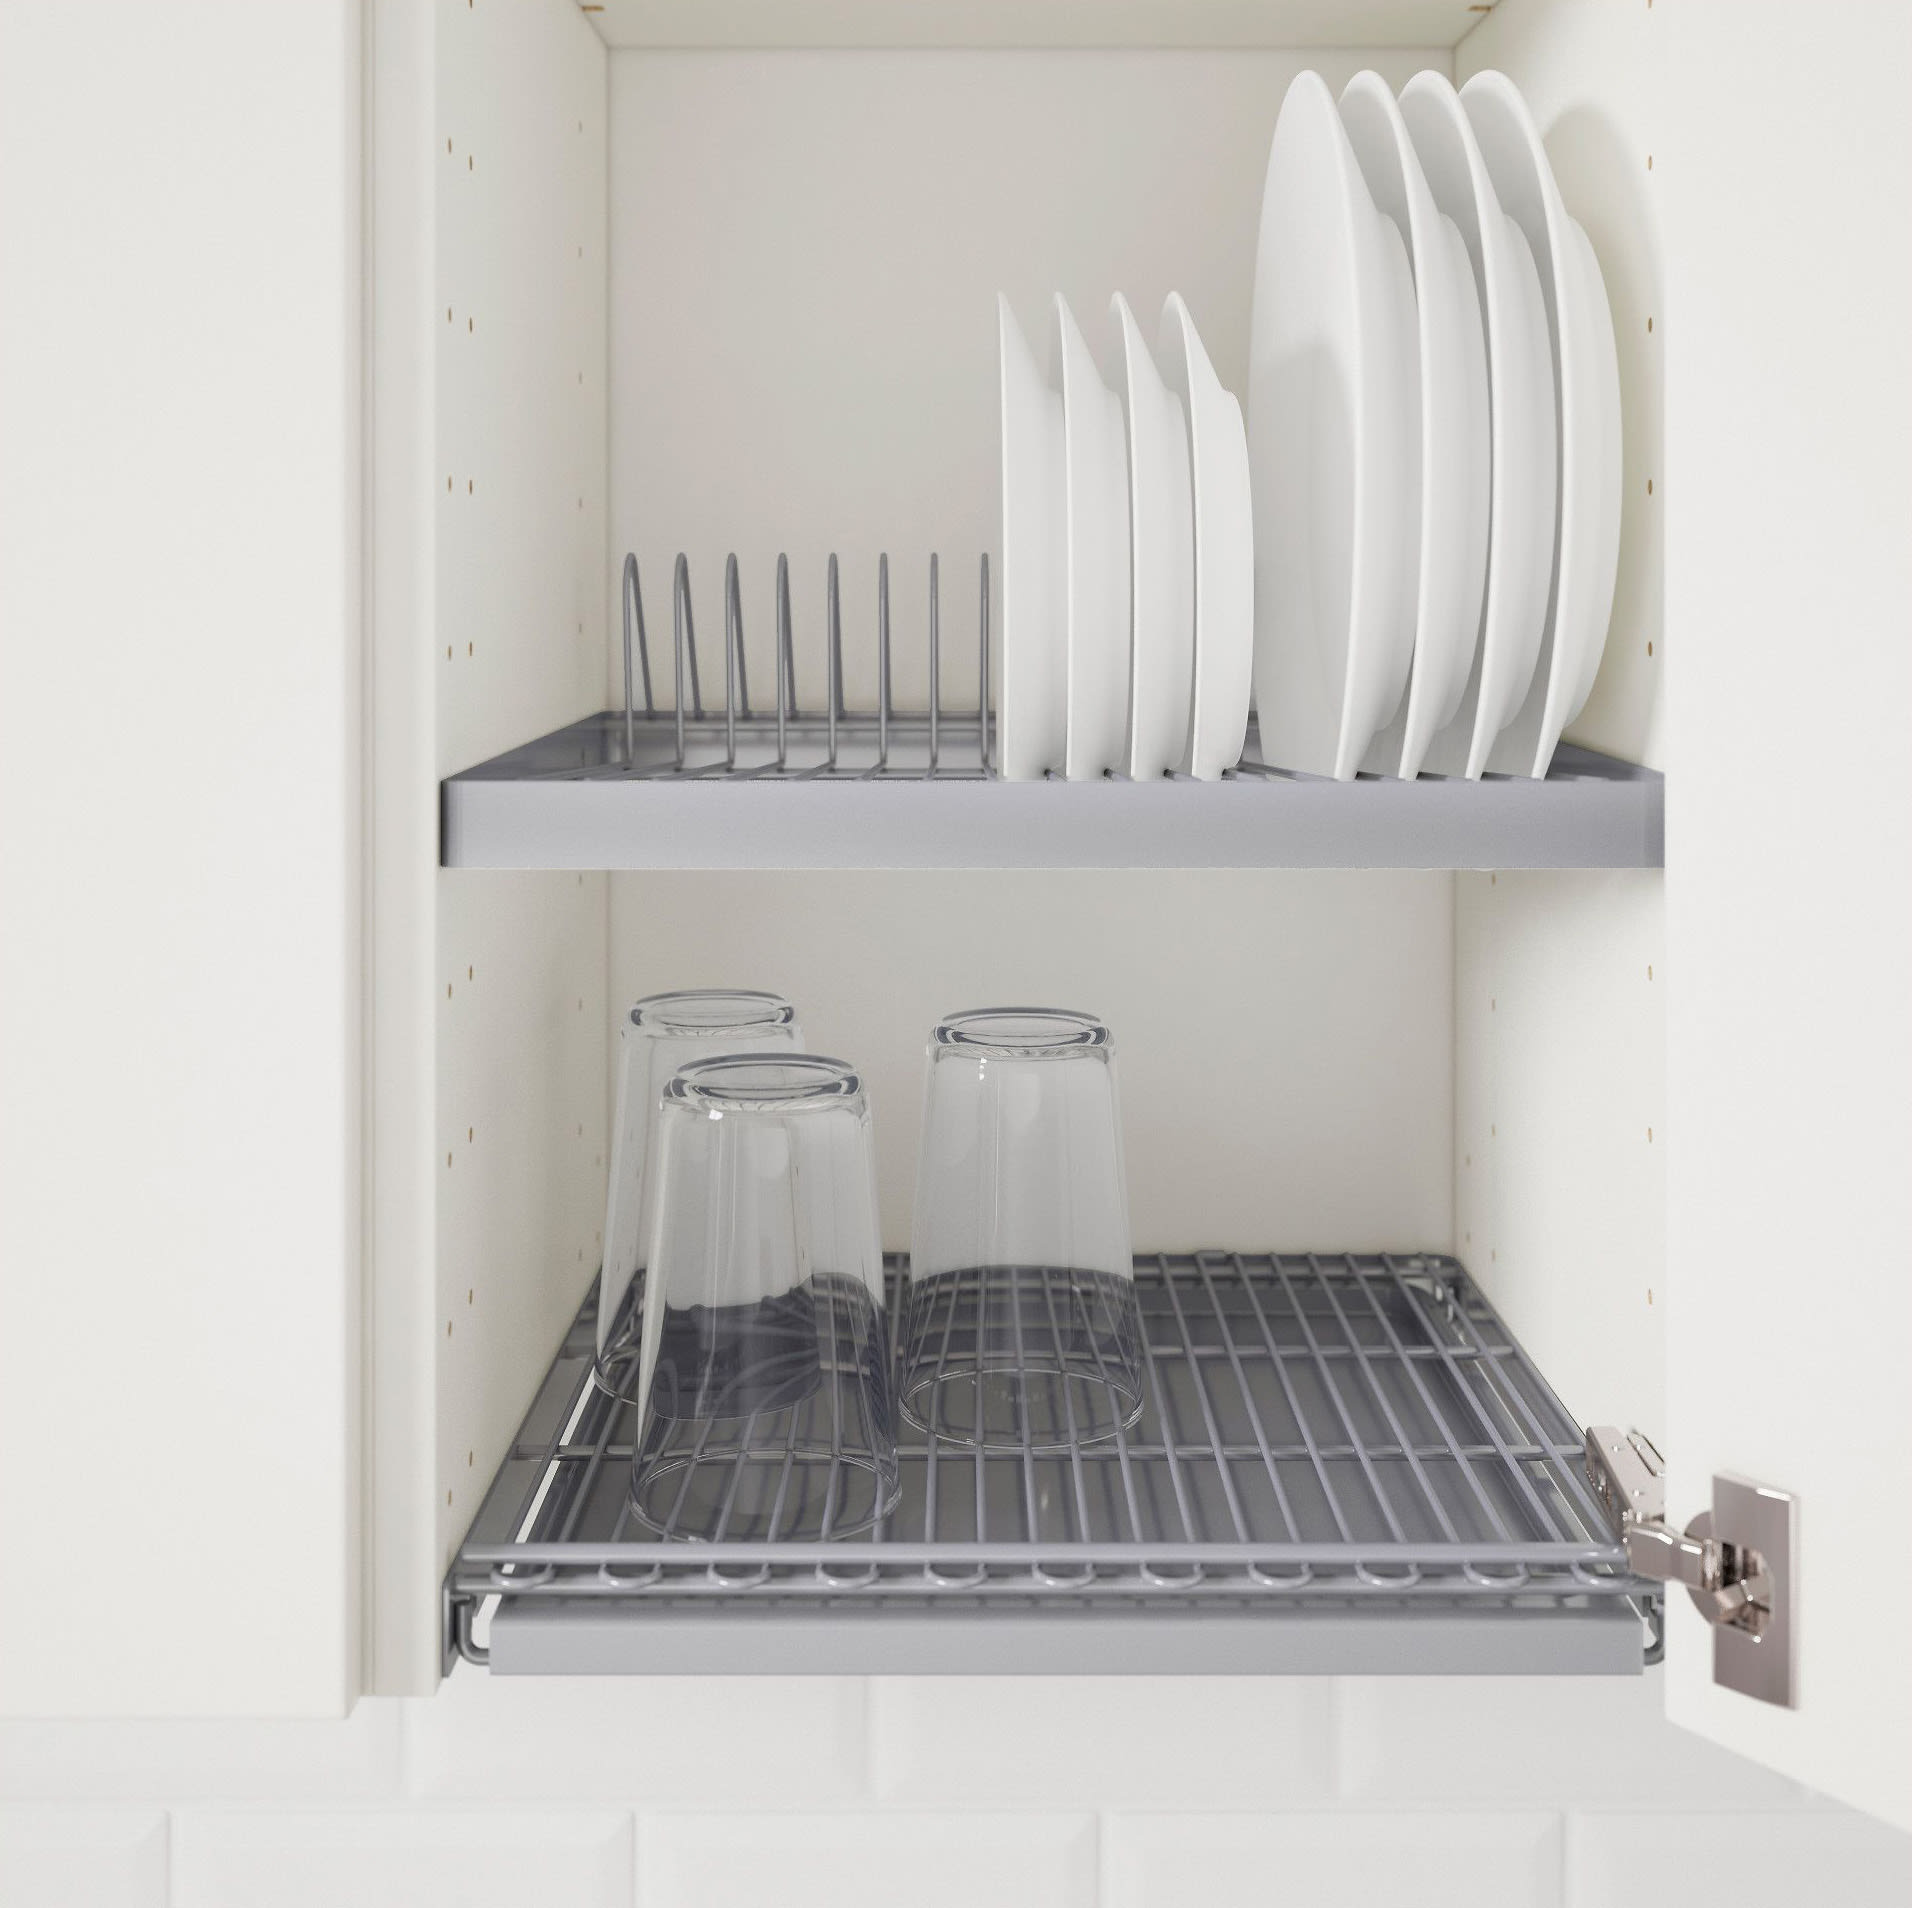 This Finnish Cleaning Method Will Change the Way You Dry Dishes -  Astiankuivauskaappi Cabinet